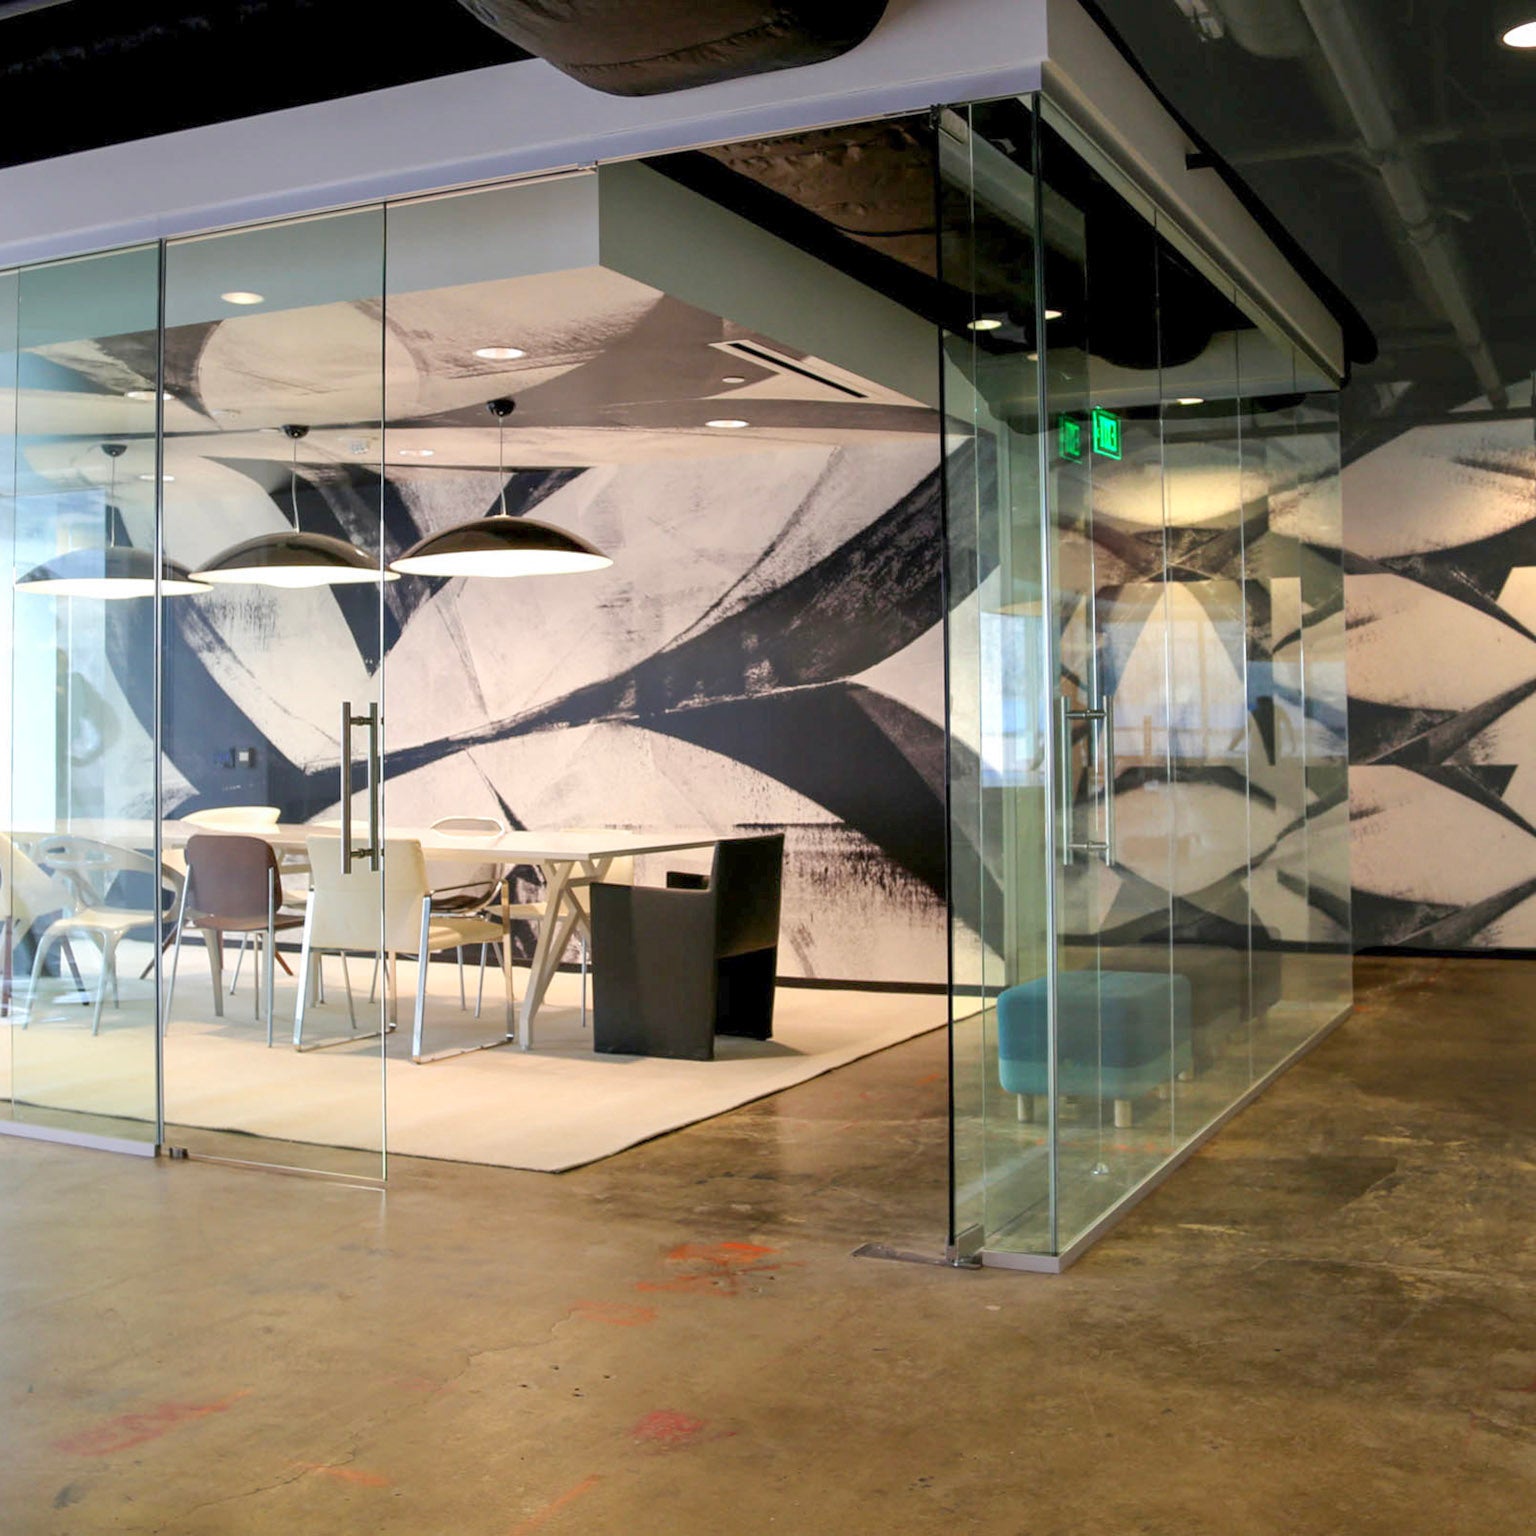 Chic conference room within Brookfield Design Hive with a custom black-and-white abstract wallcovering by WRAPPED Studio, inspired by Frank Stella's art, and modern lighting fixtures.